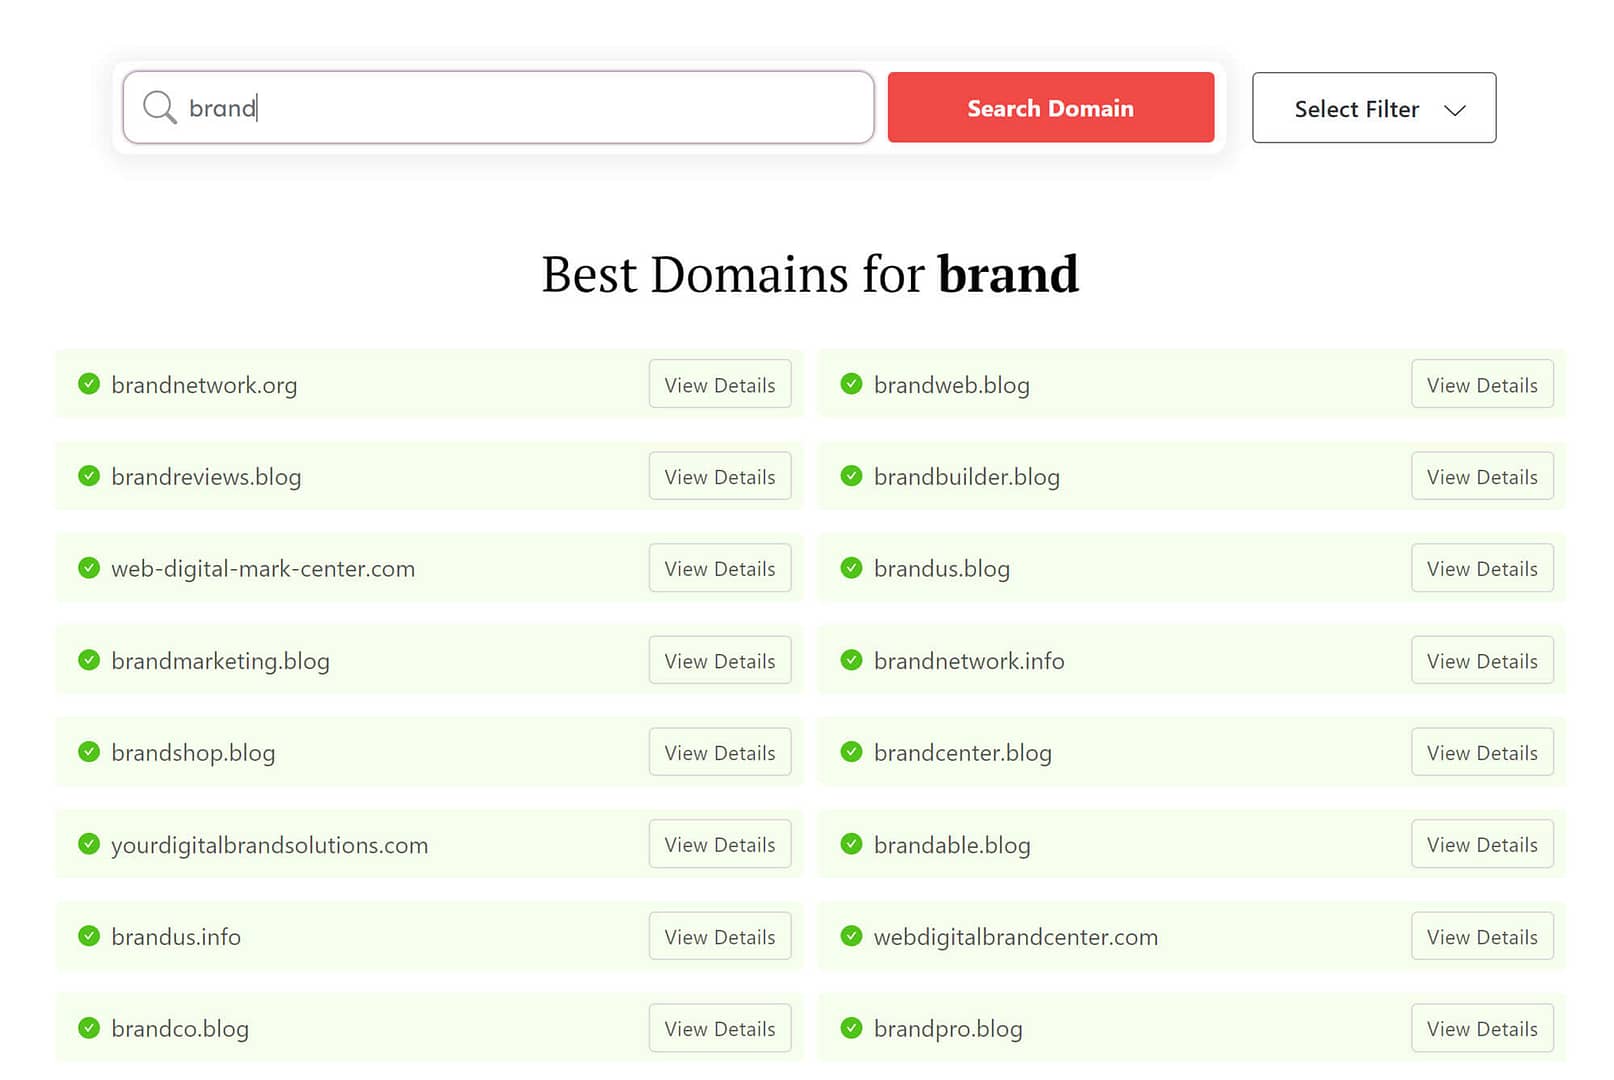 DomainWheel free website name generator search results for "brand"